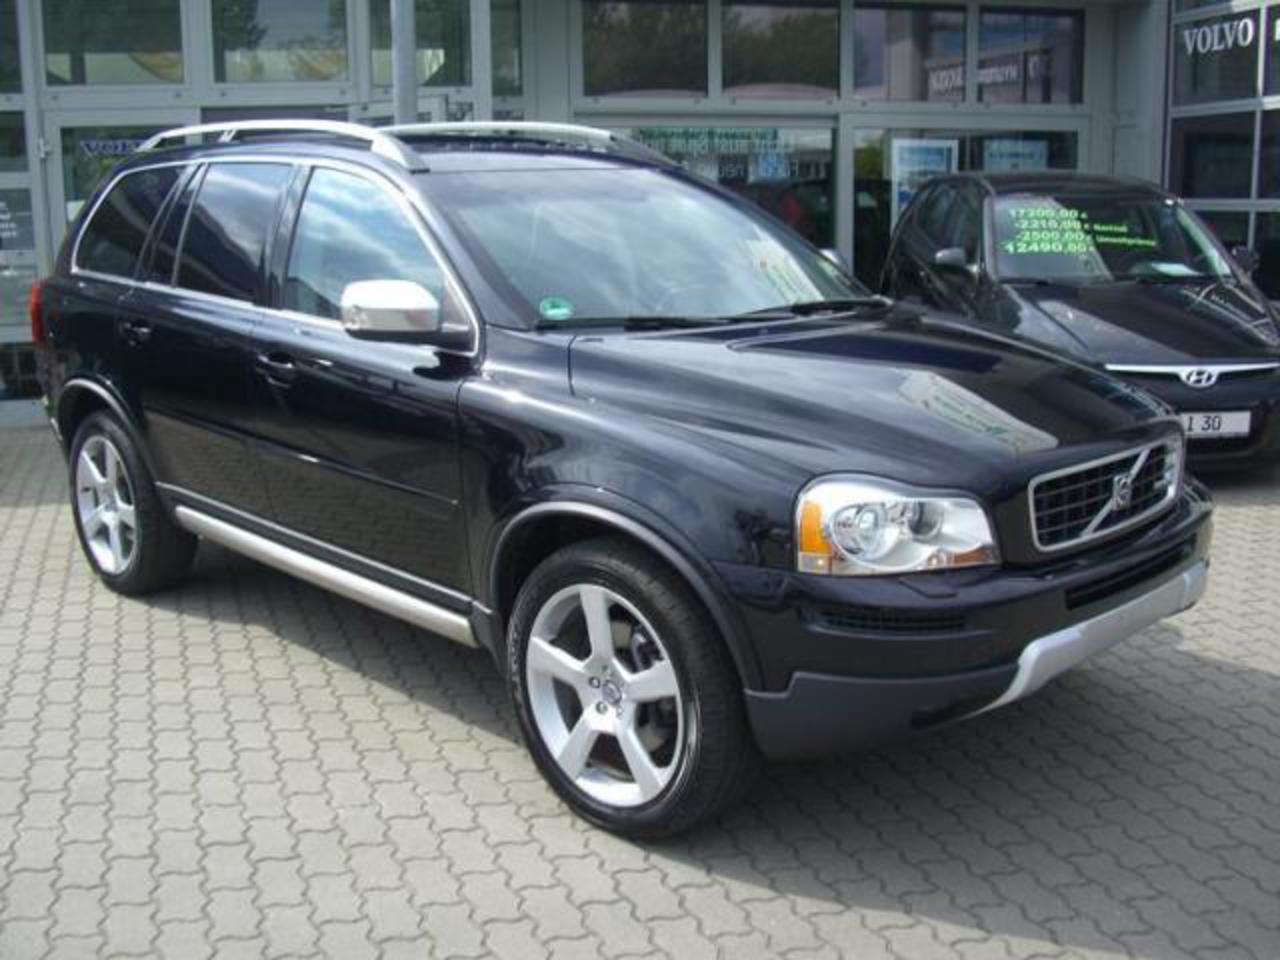 NÂ° 3129 -VOLVO XC 90 D5 R Design Free delivery*. Available VOLVO XC 90